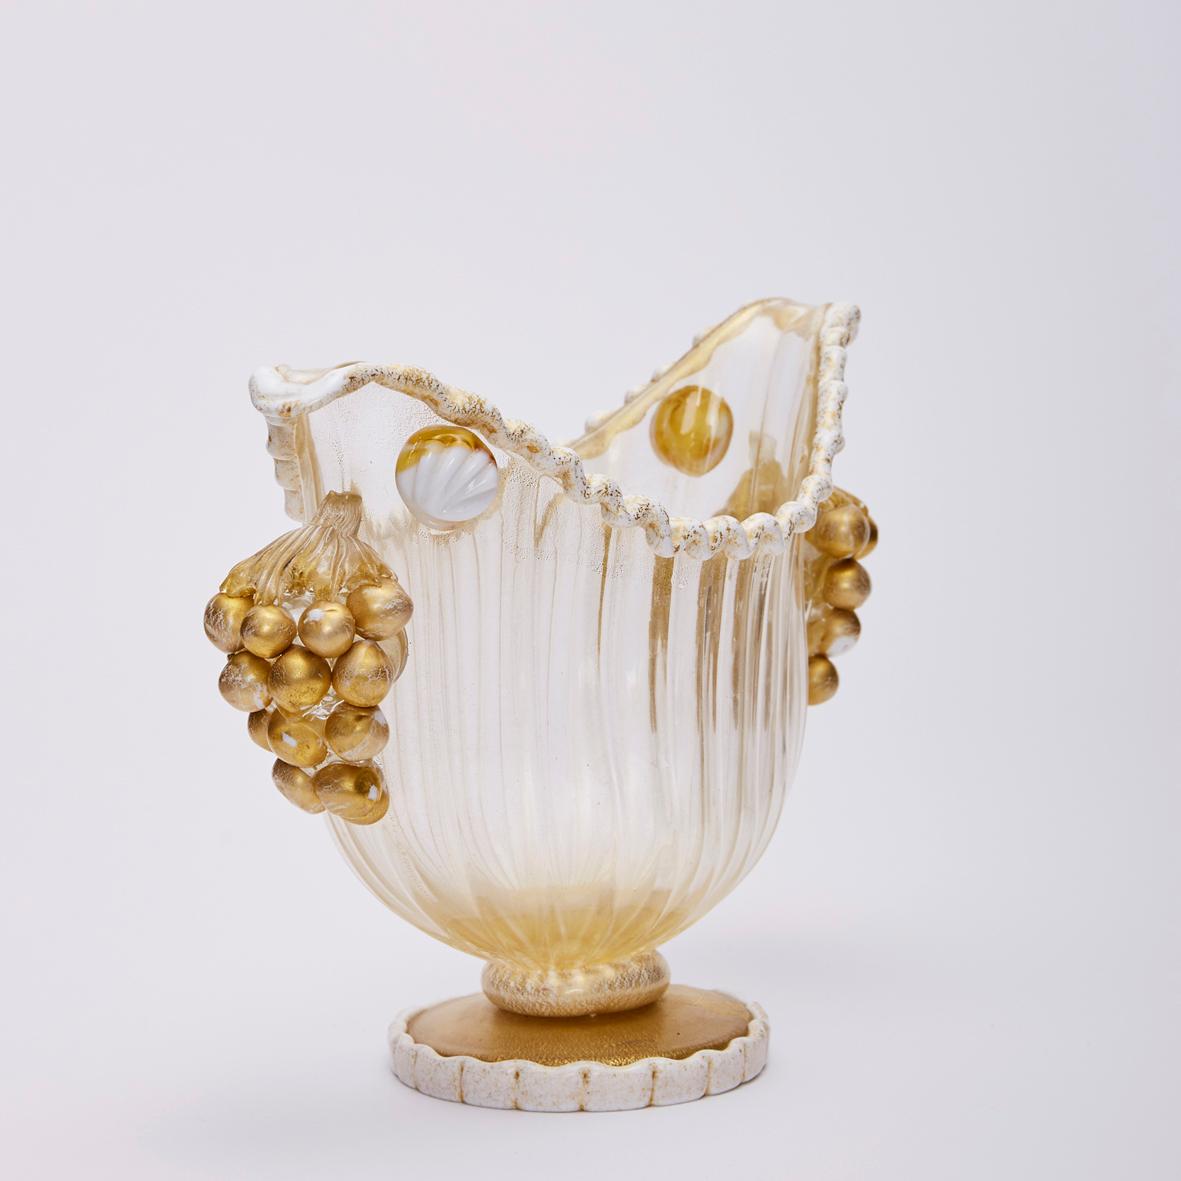 Art Glass Footed Bowl Gold Leaf and Grapes, Ercole Barovier for Barovier Toso & Co 1949 For Sale